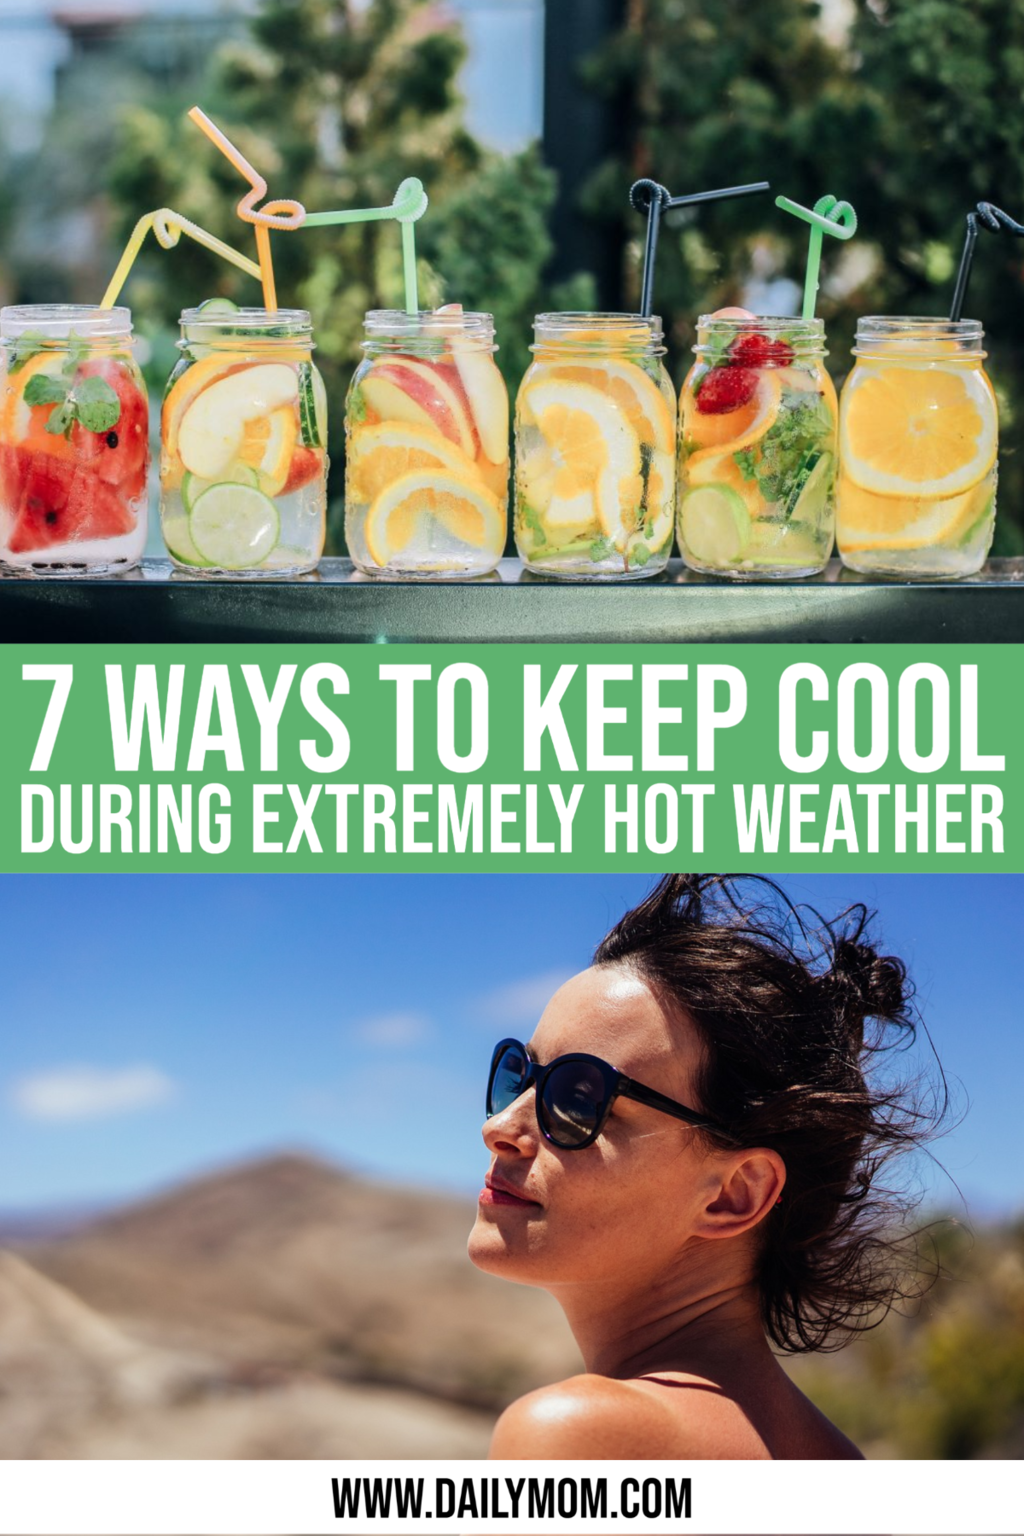 7 Ideas To Keep You And Your House Cool During Hot Weather